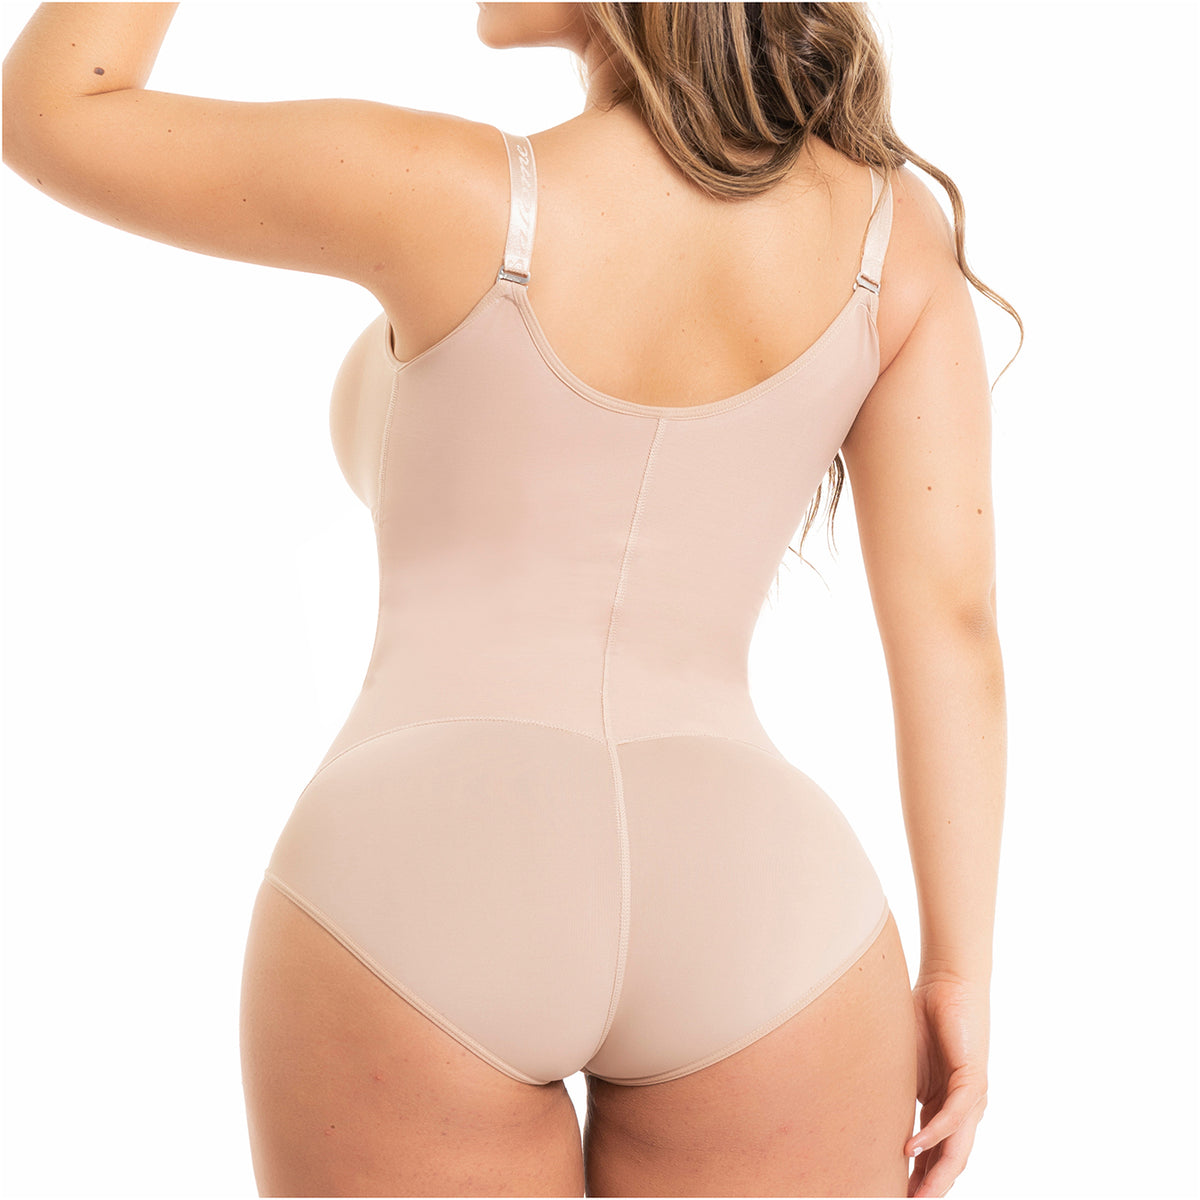 Post-Surgery Liposuction and Slimming massages Faja with High back